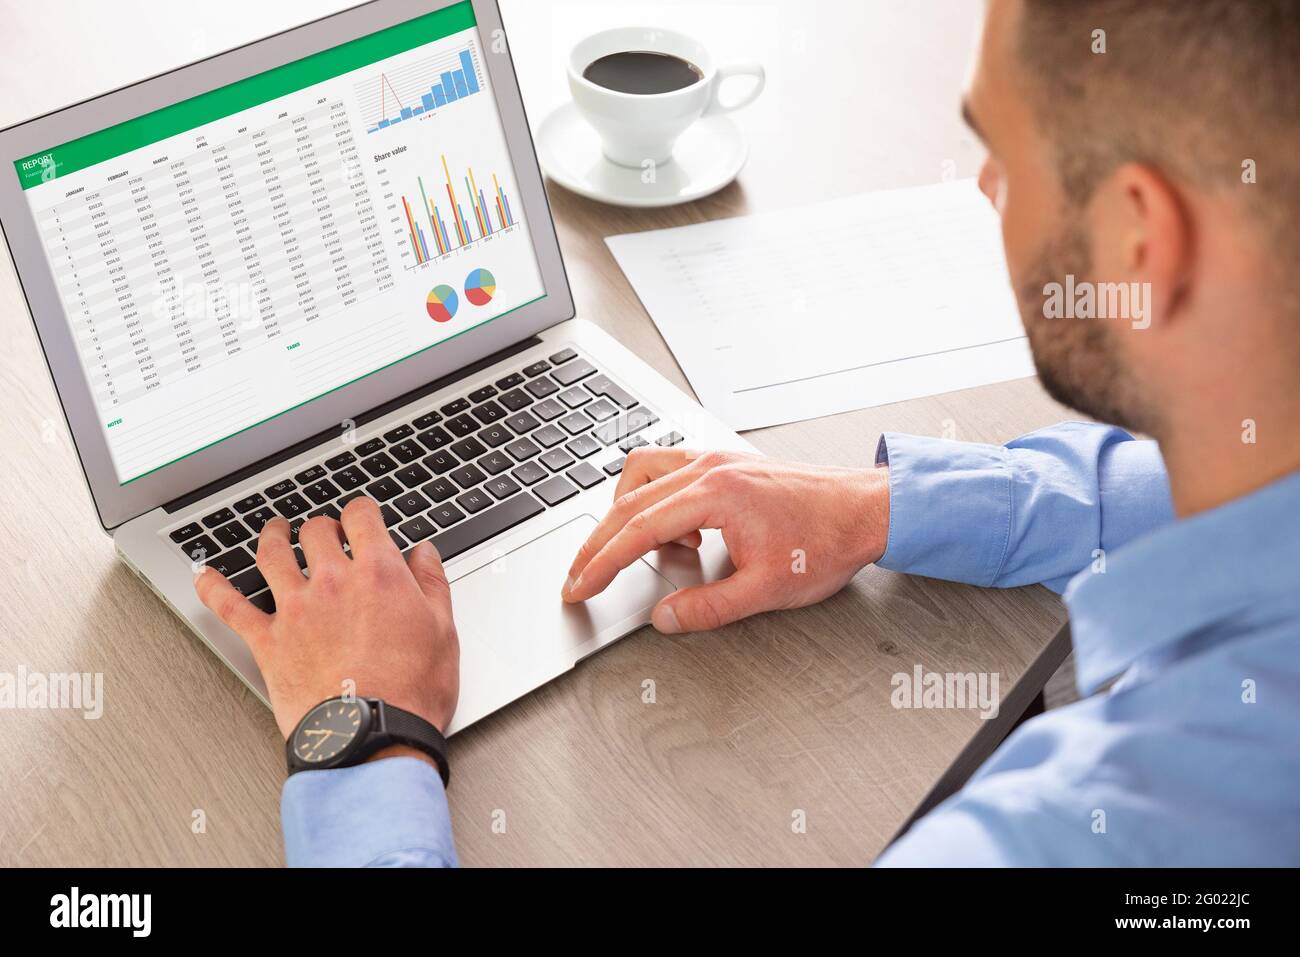 Business analytics applications on laptop. Financial data analysis concept. Business analyst works with data Stock Photo